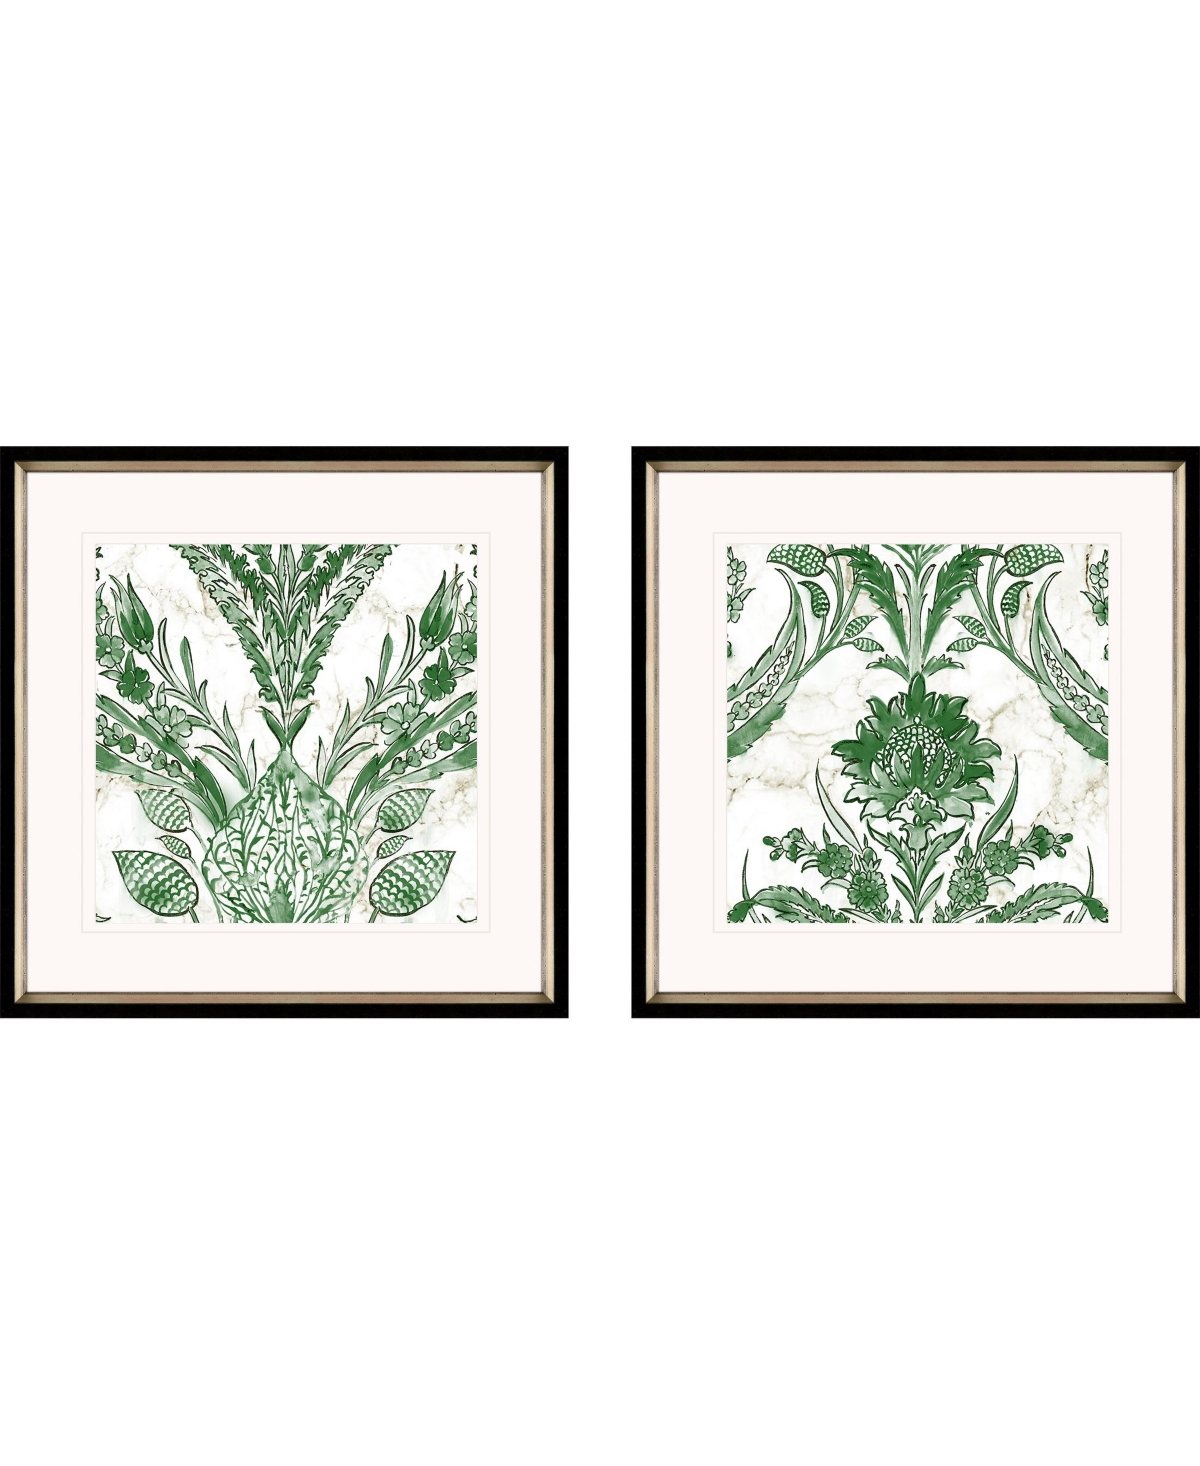 Paragon Picture Gallery Kelly Ikat Ii Framed Art, Set Of 2 In Green